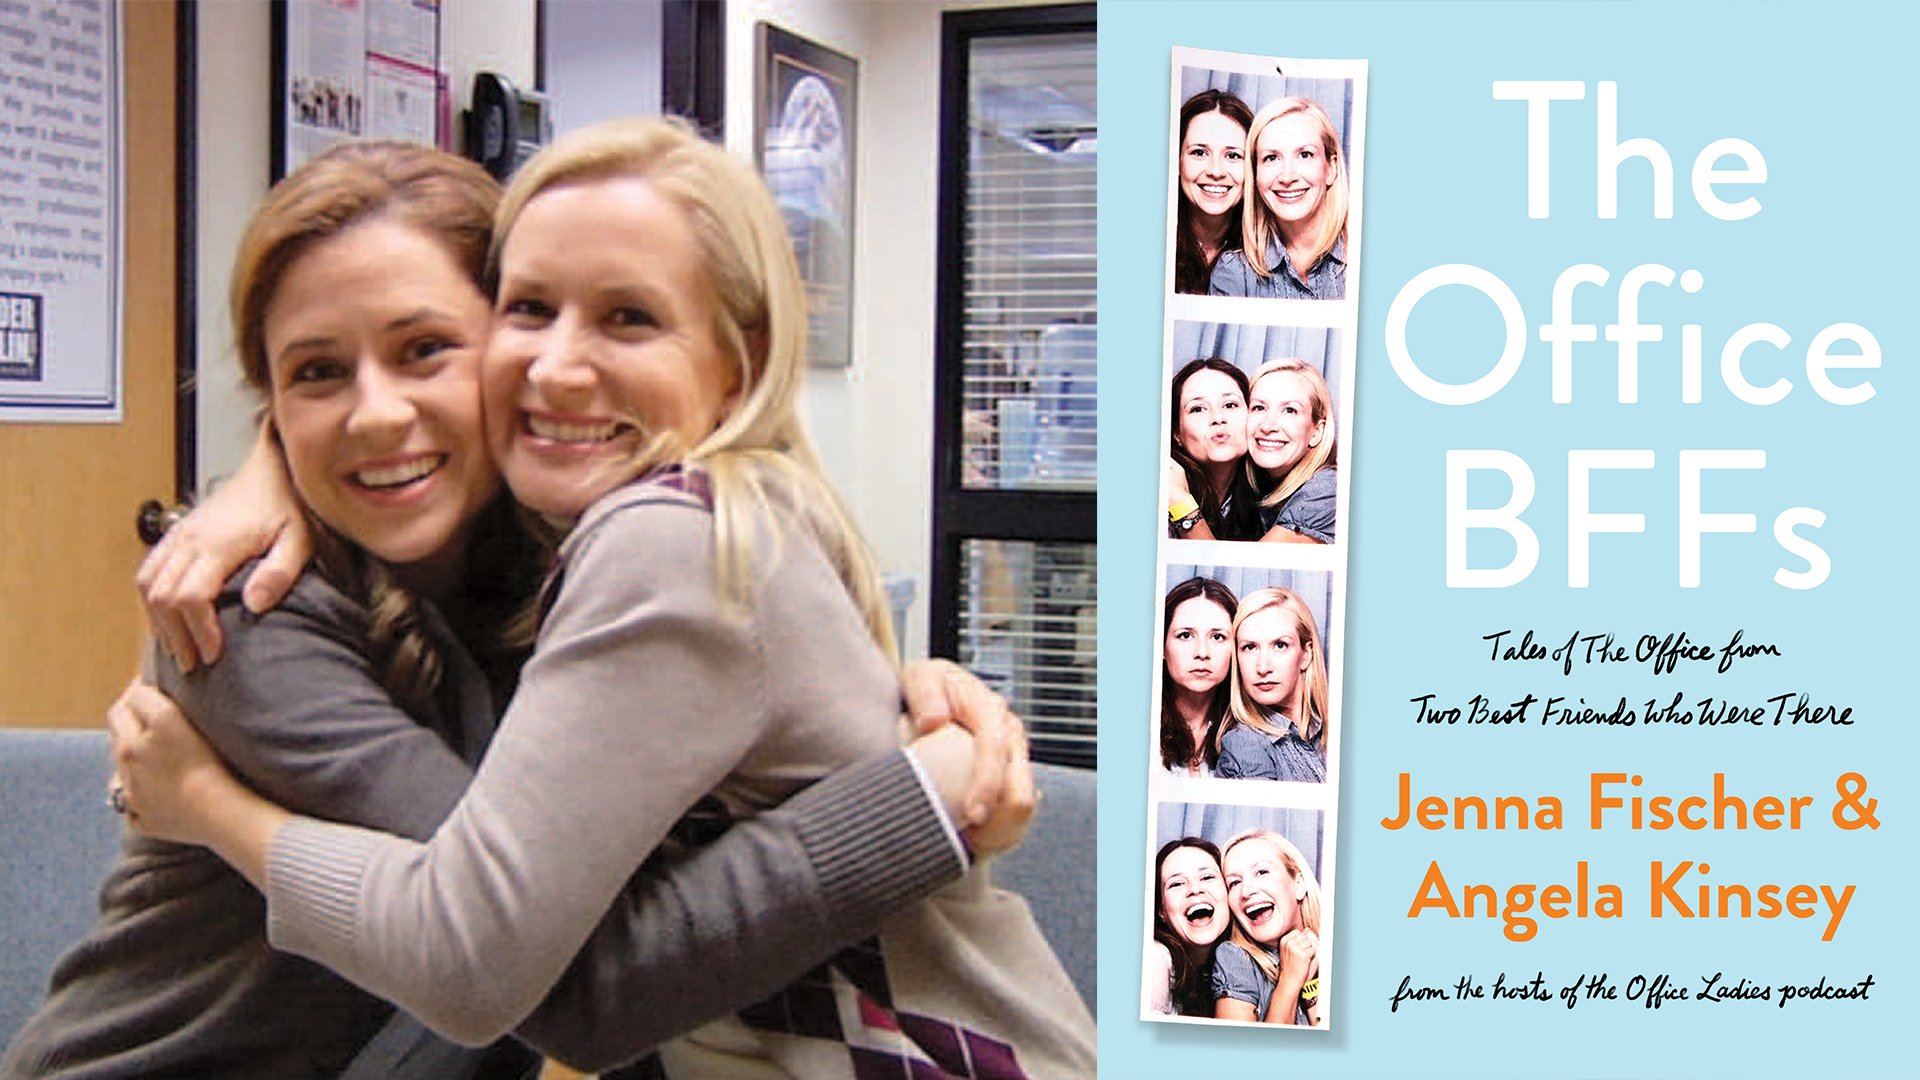 A side by side composite: The photo on the left is of two women (Jenna Fischer and Angela Kinsey) hugging on the set of 